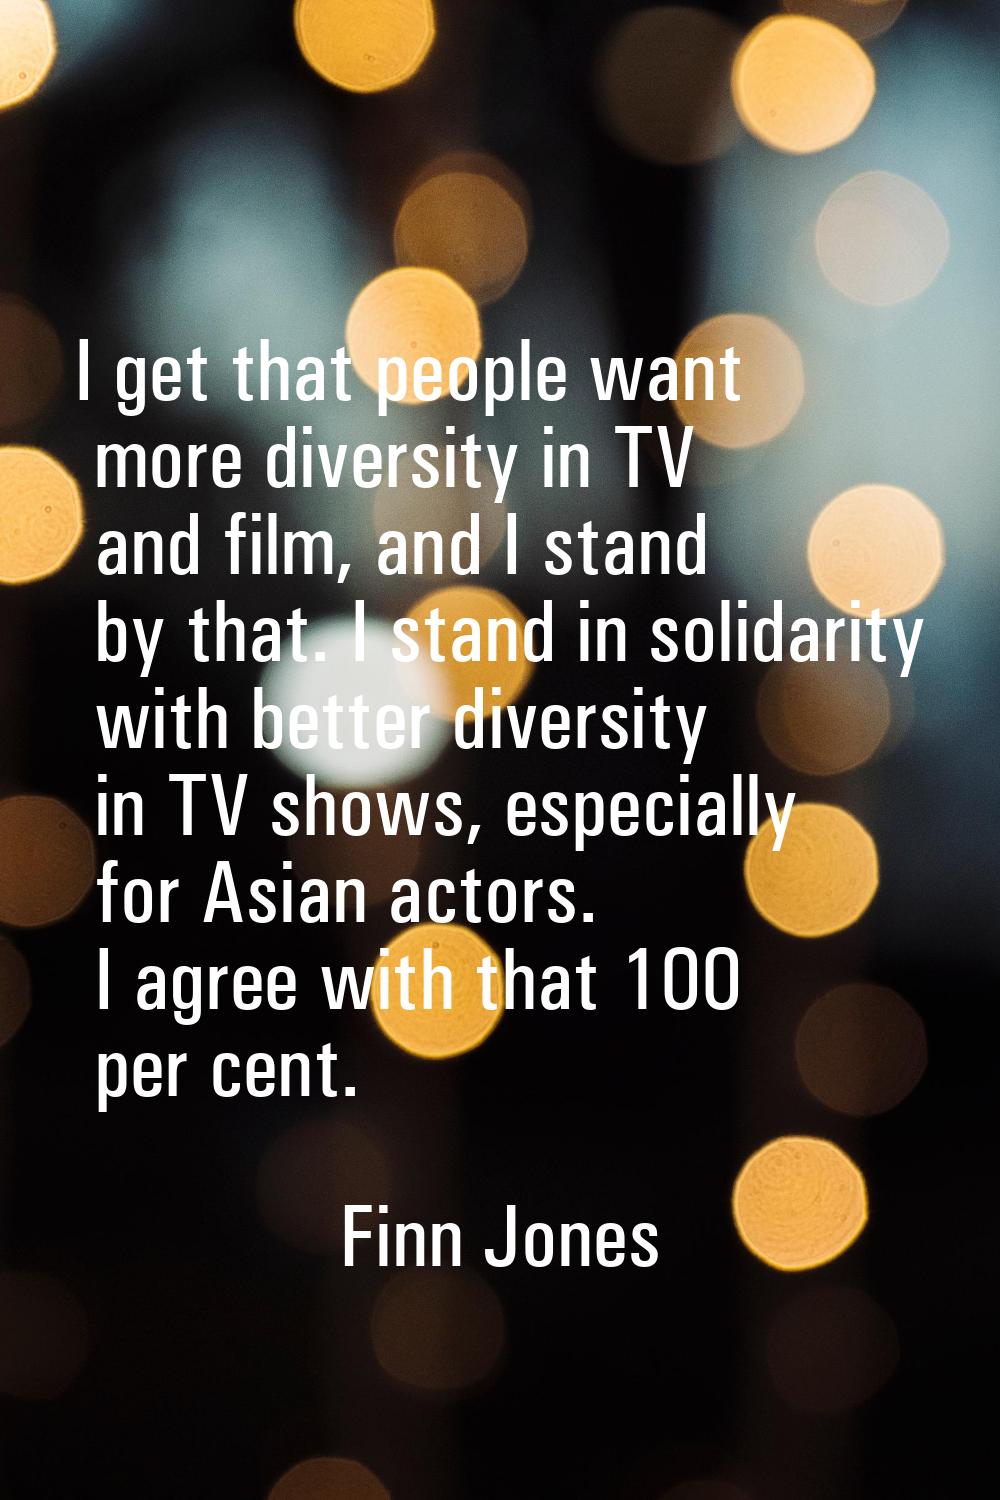 I get that people want more diversity in TV and film, and I stand by that. I stand in solidarity wi